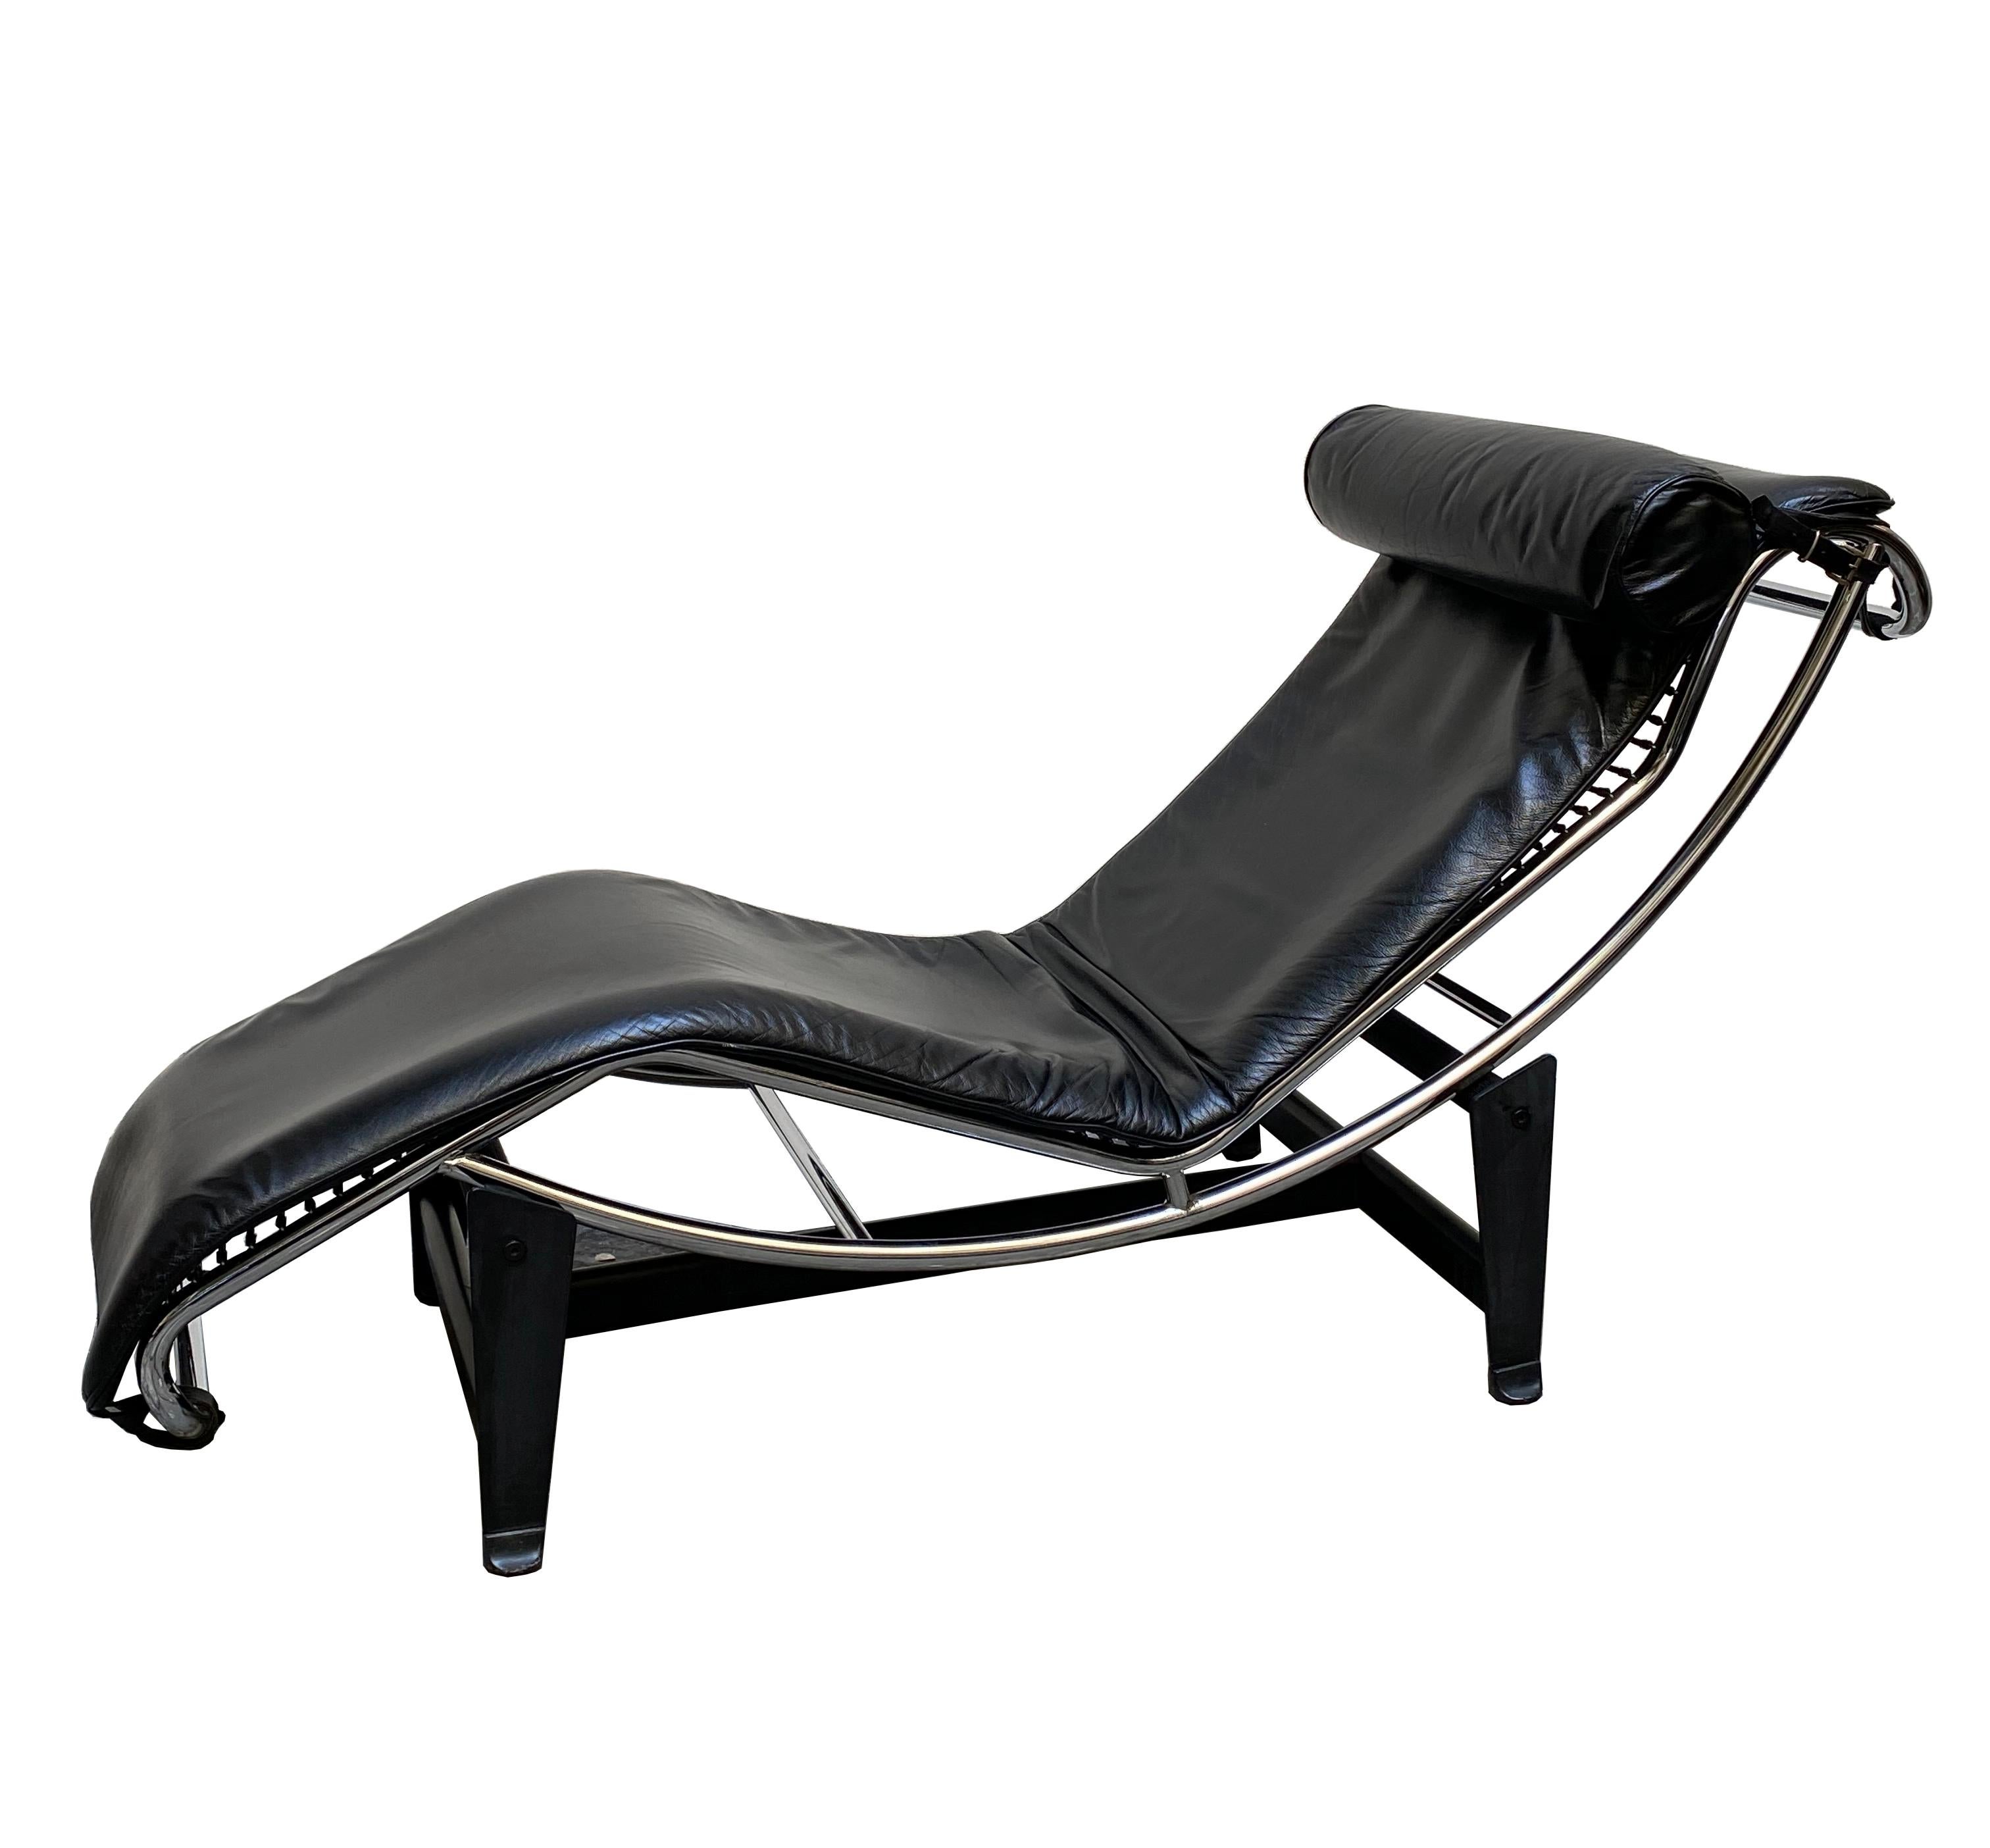 This LC4 lounge chair with black steel base, adjustable shiny chromed metal tubular structure, seat and headrest in black leather is made in the style of Cassina. It is in perfect condition. LC4 is the definitive chaise longue: built in a form